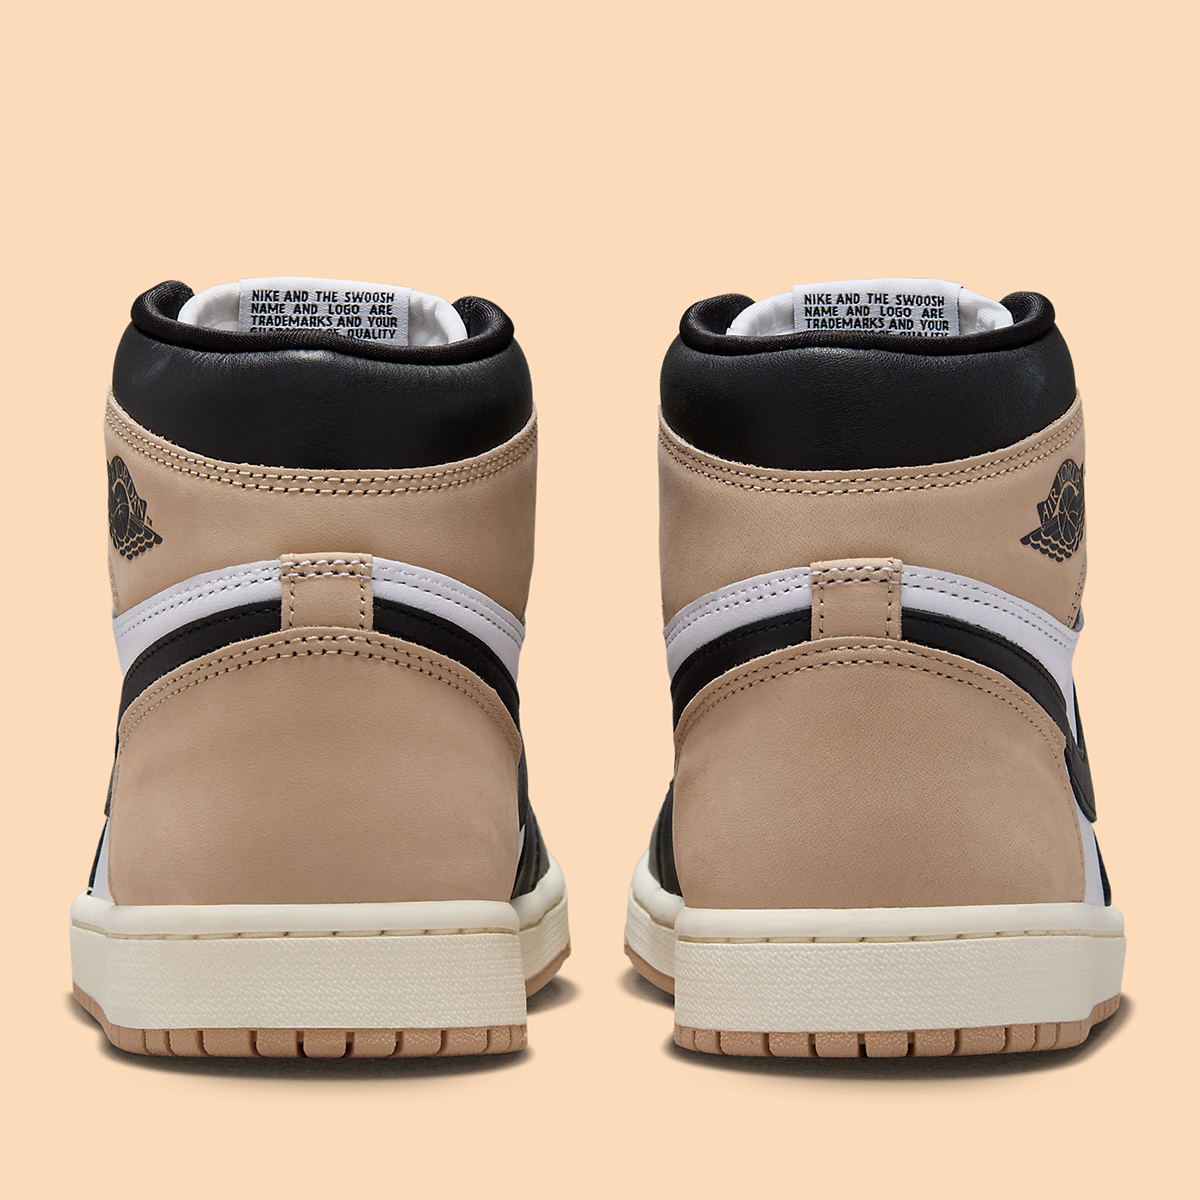 The most sought after Air Jordan silhouettes may have come from collabs with fashion labels Latte Fd2596 021 Release Date 11